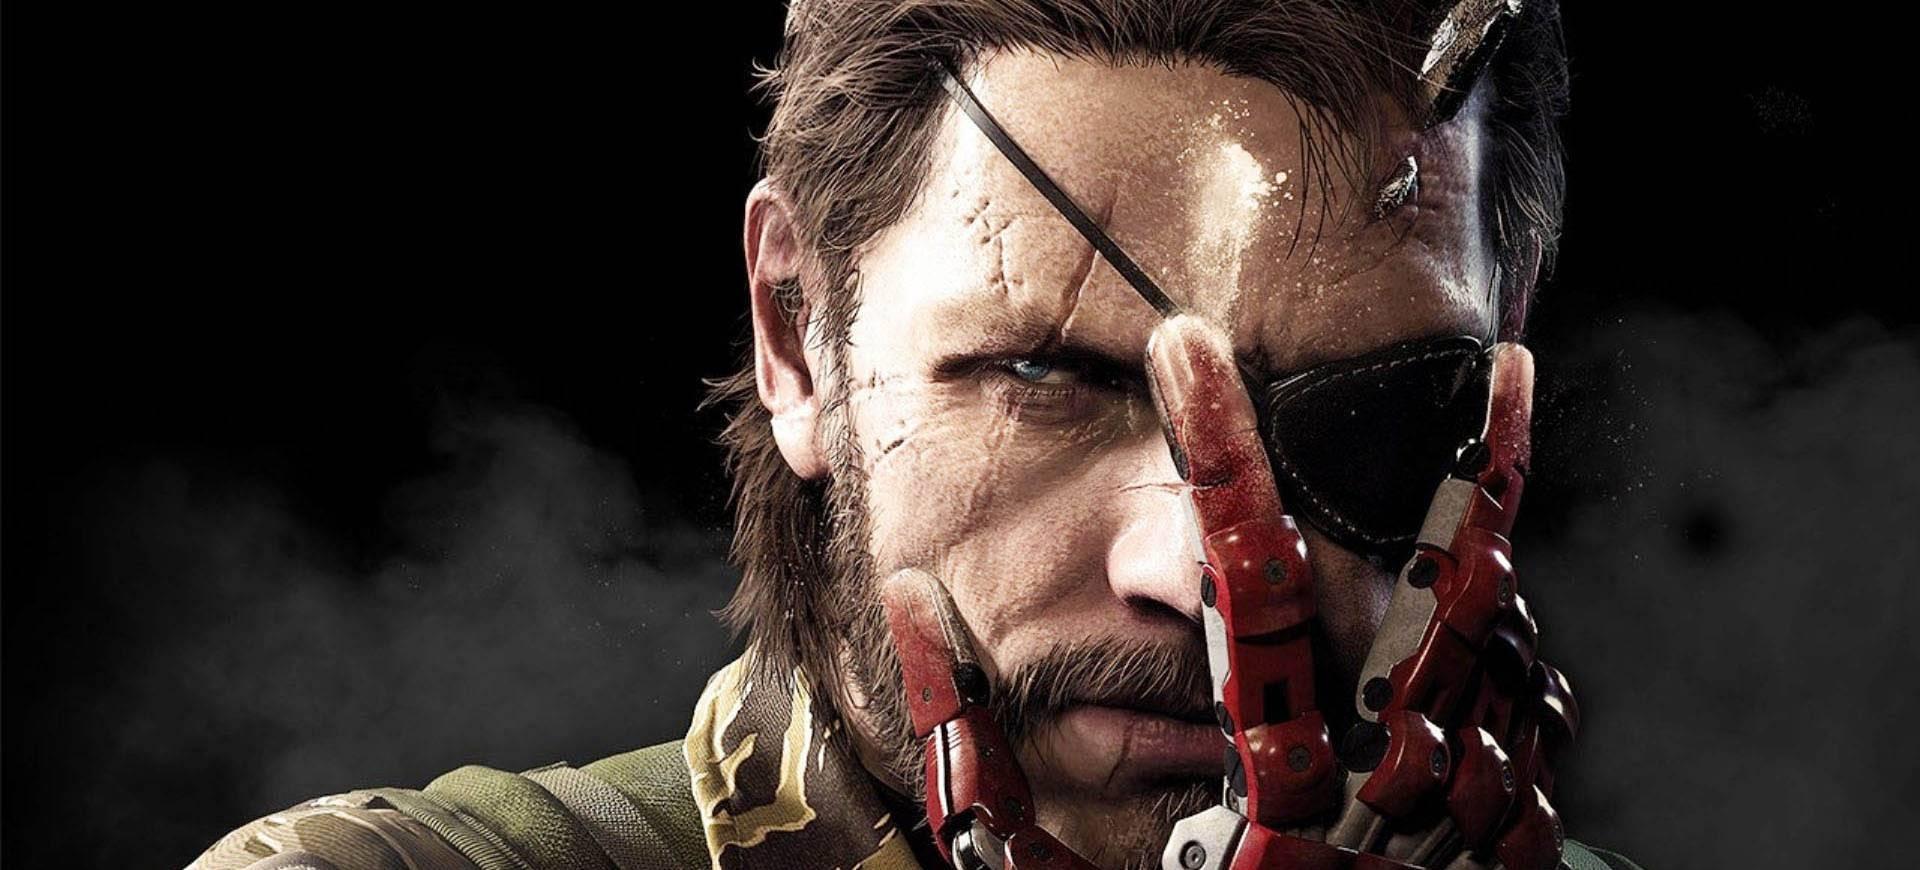 Game PS4 - Metal Gear Solid V: The Phantom Pain